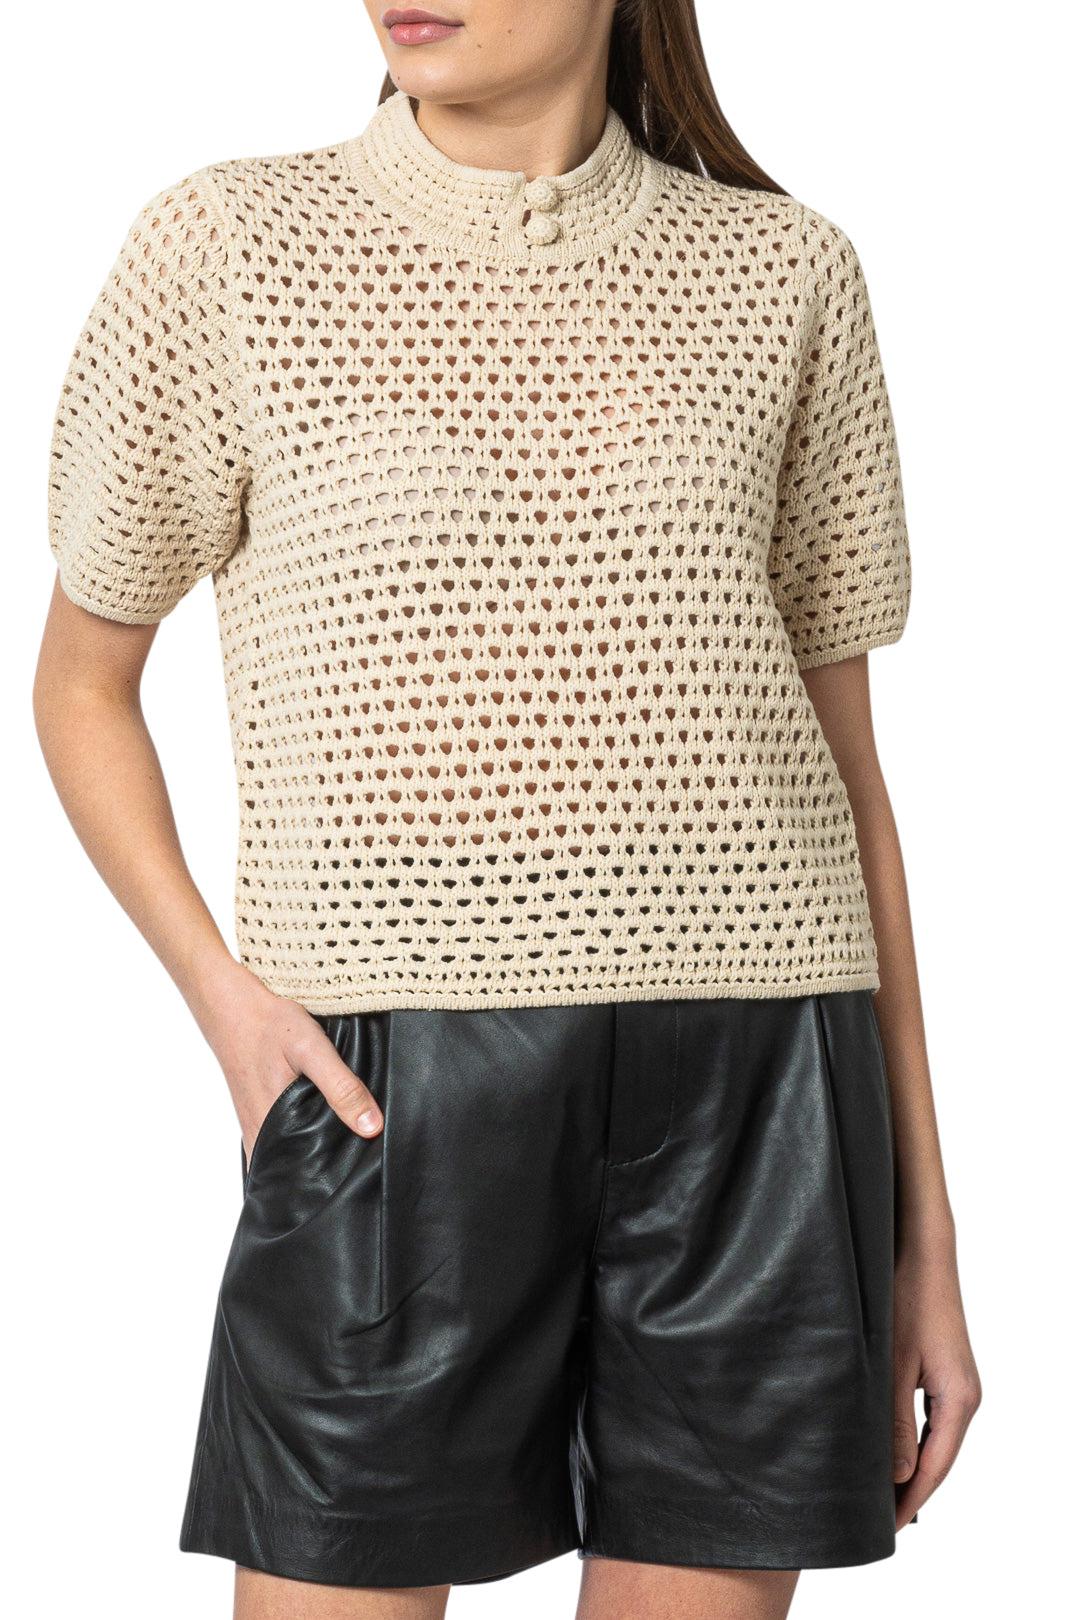 The Garment-Cut-out knit top-dgallerystore